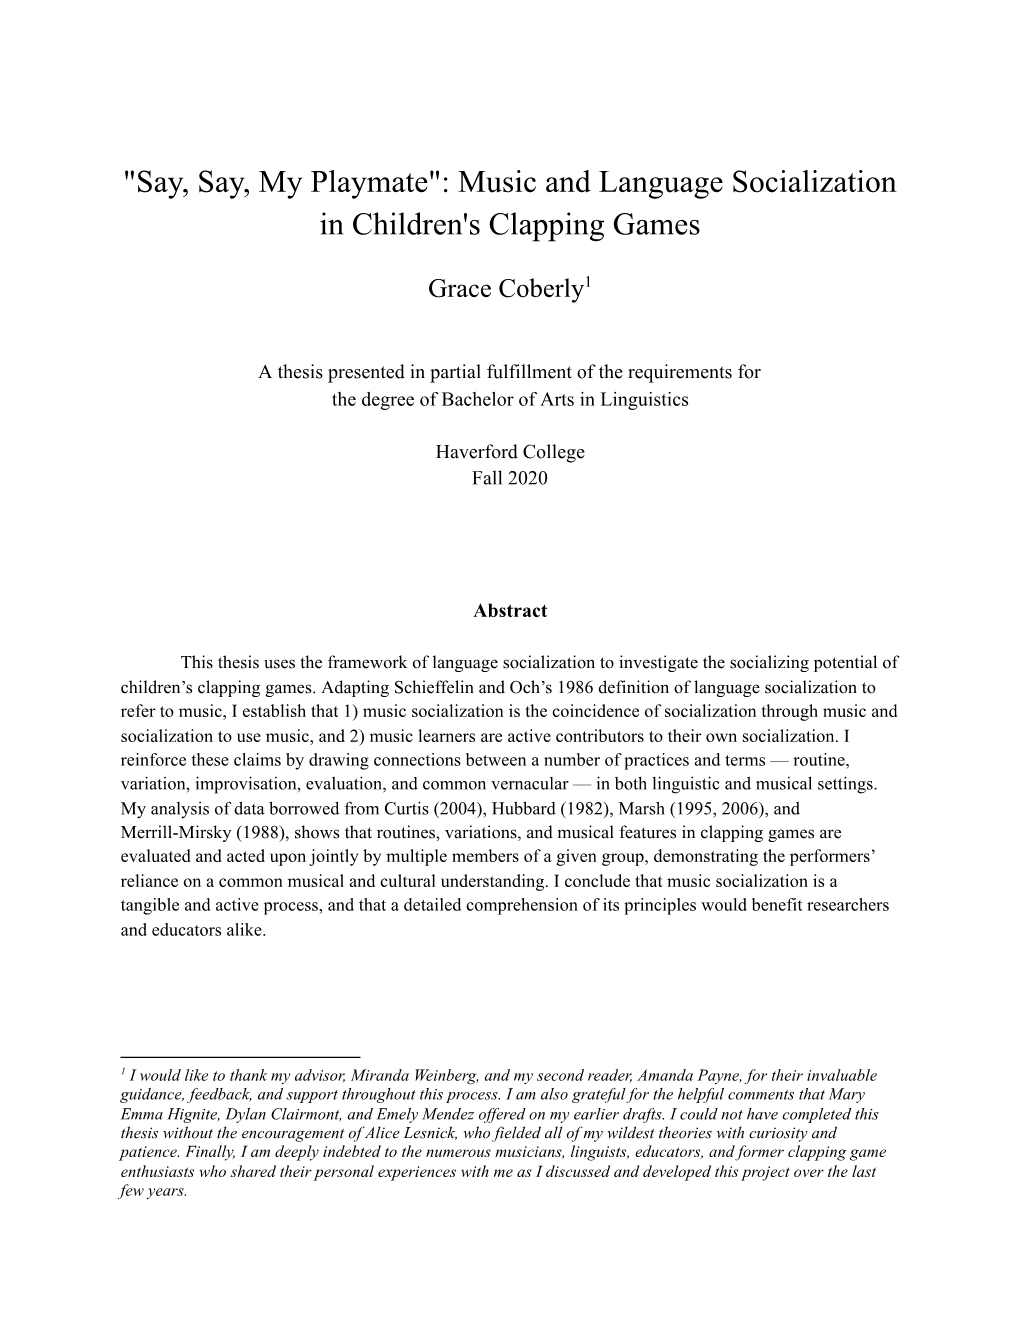 "Say, Say, My Playmate": Music and Language Socialization in Children's Clapping Games